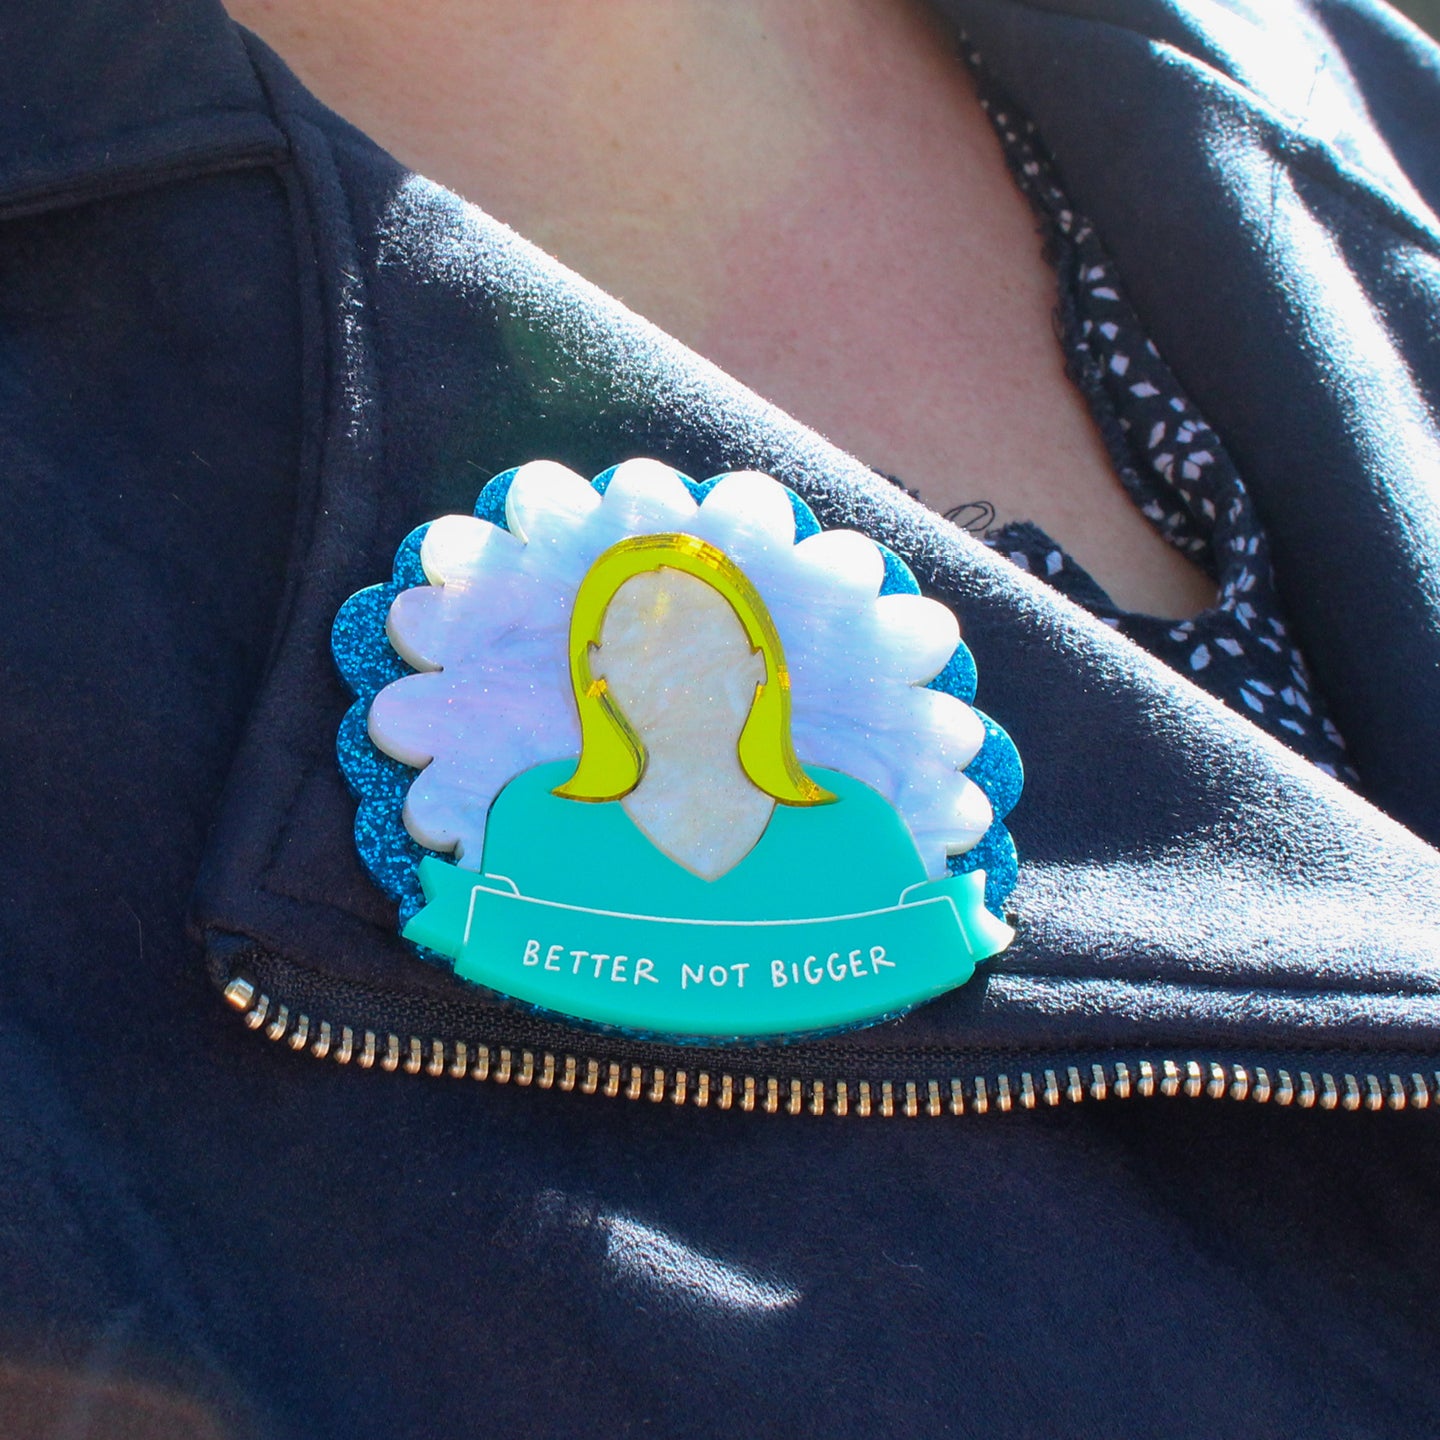 Celebrating the Cool: The Michelle Snape Brooch